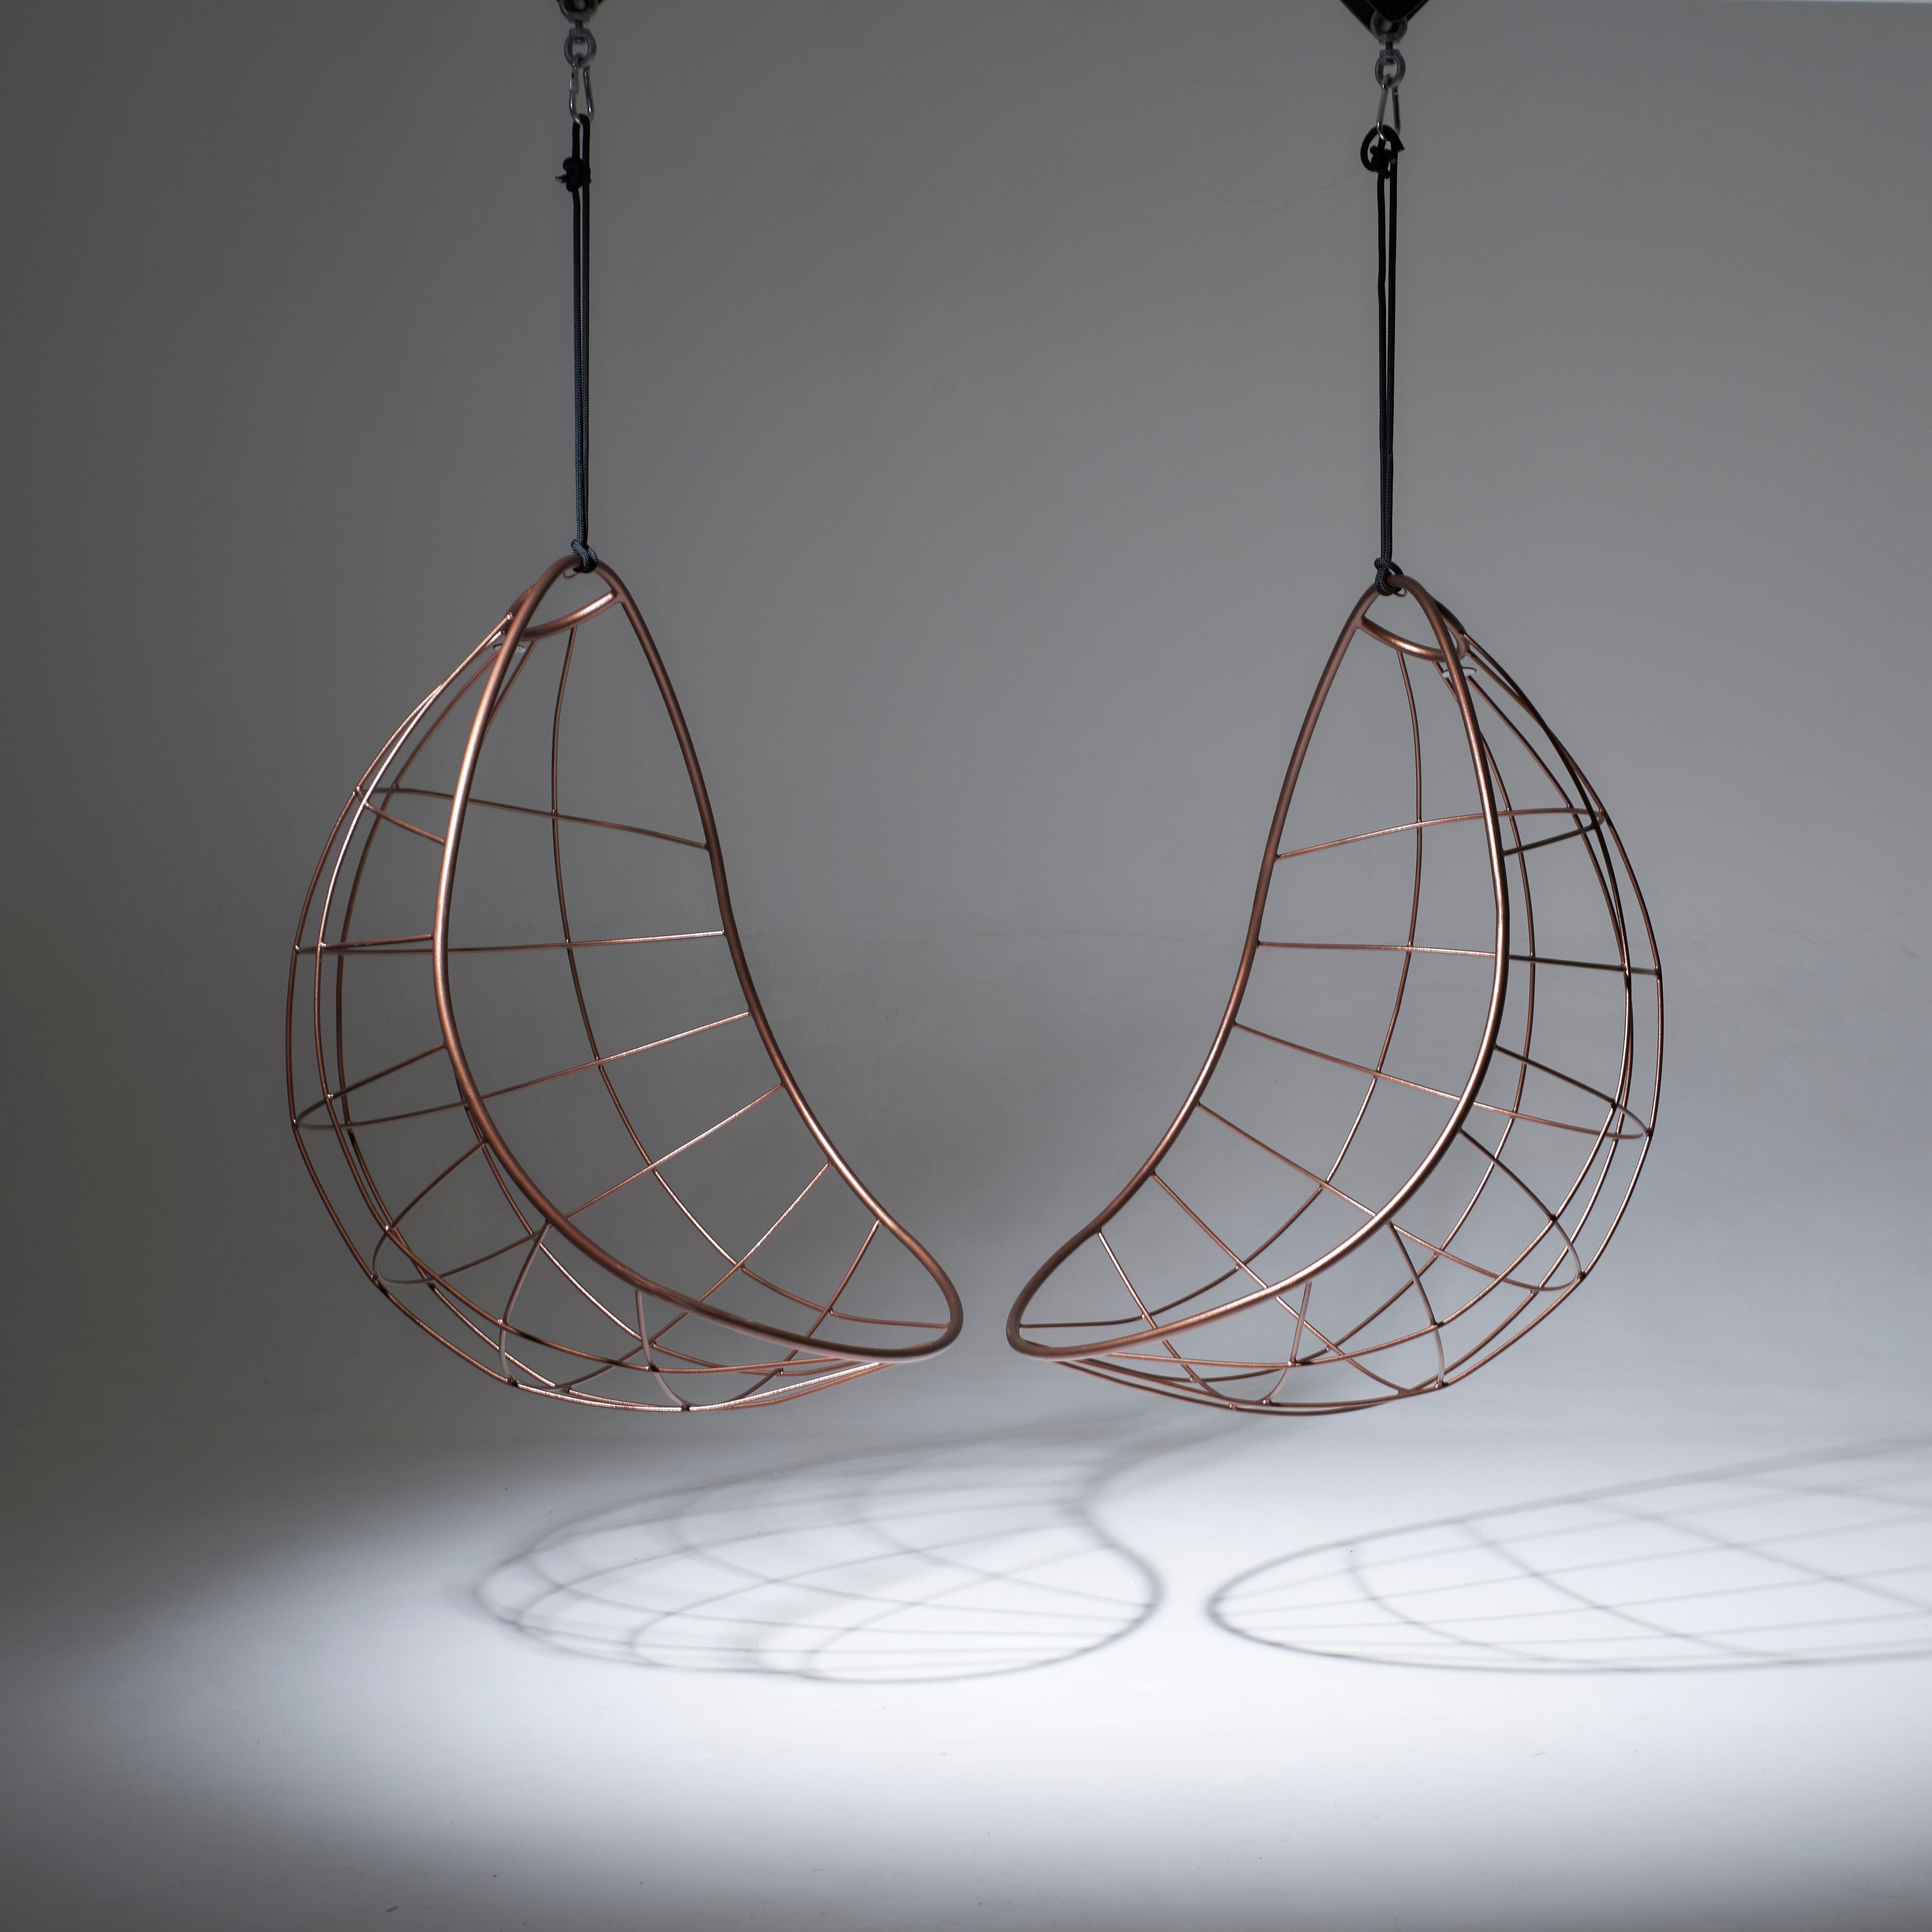 Contemporary Modern Cozy Nest Egg Hanging Chair For Sale